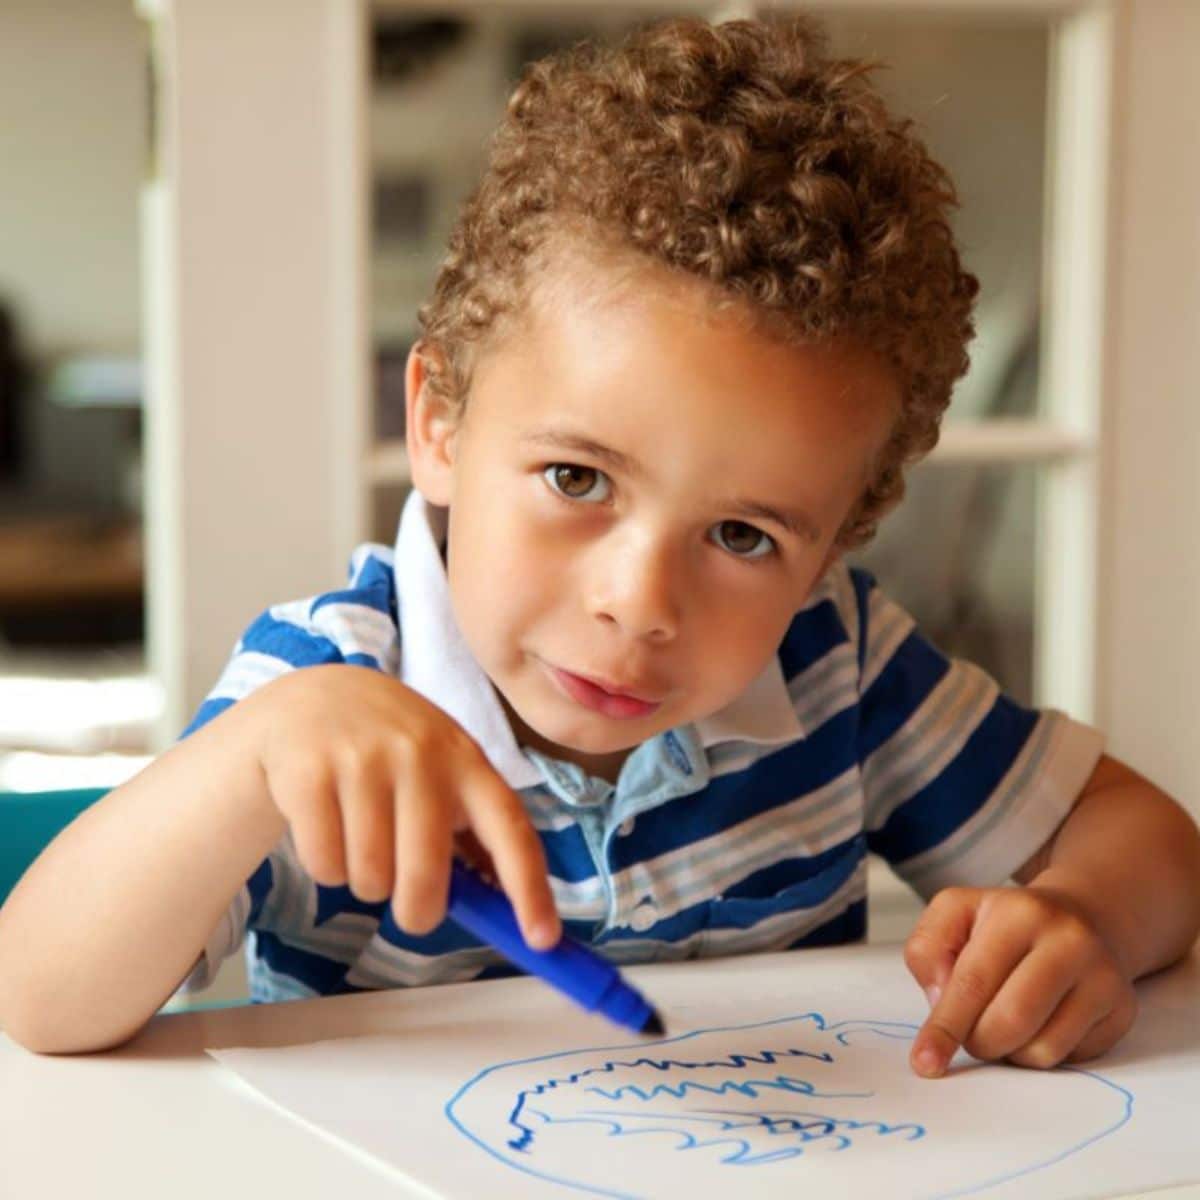 Toddler with a blue marker drawing on a paper sheet.